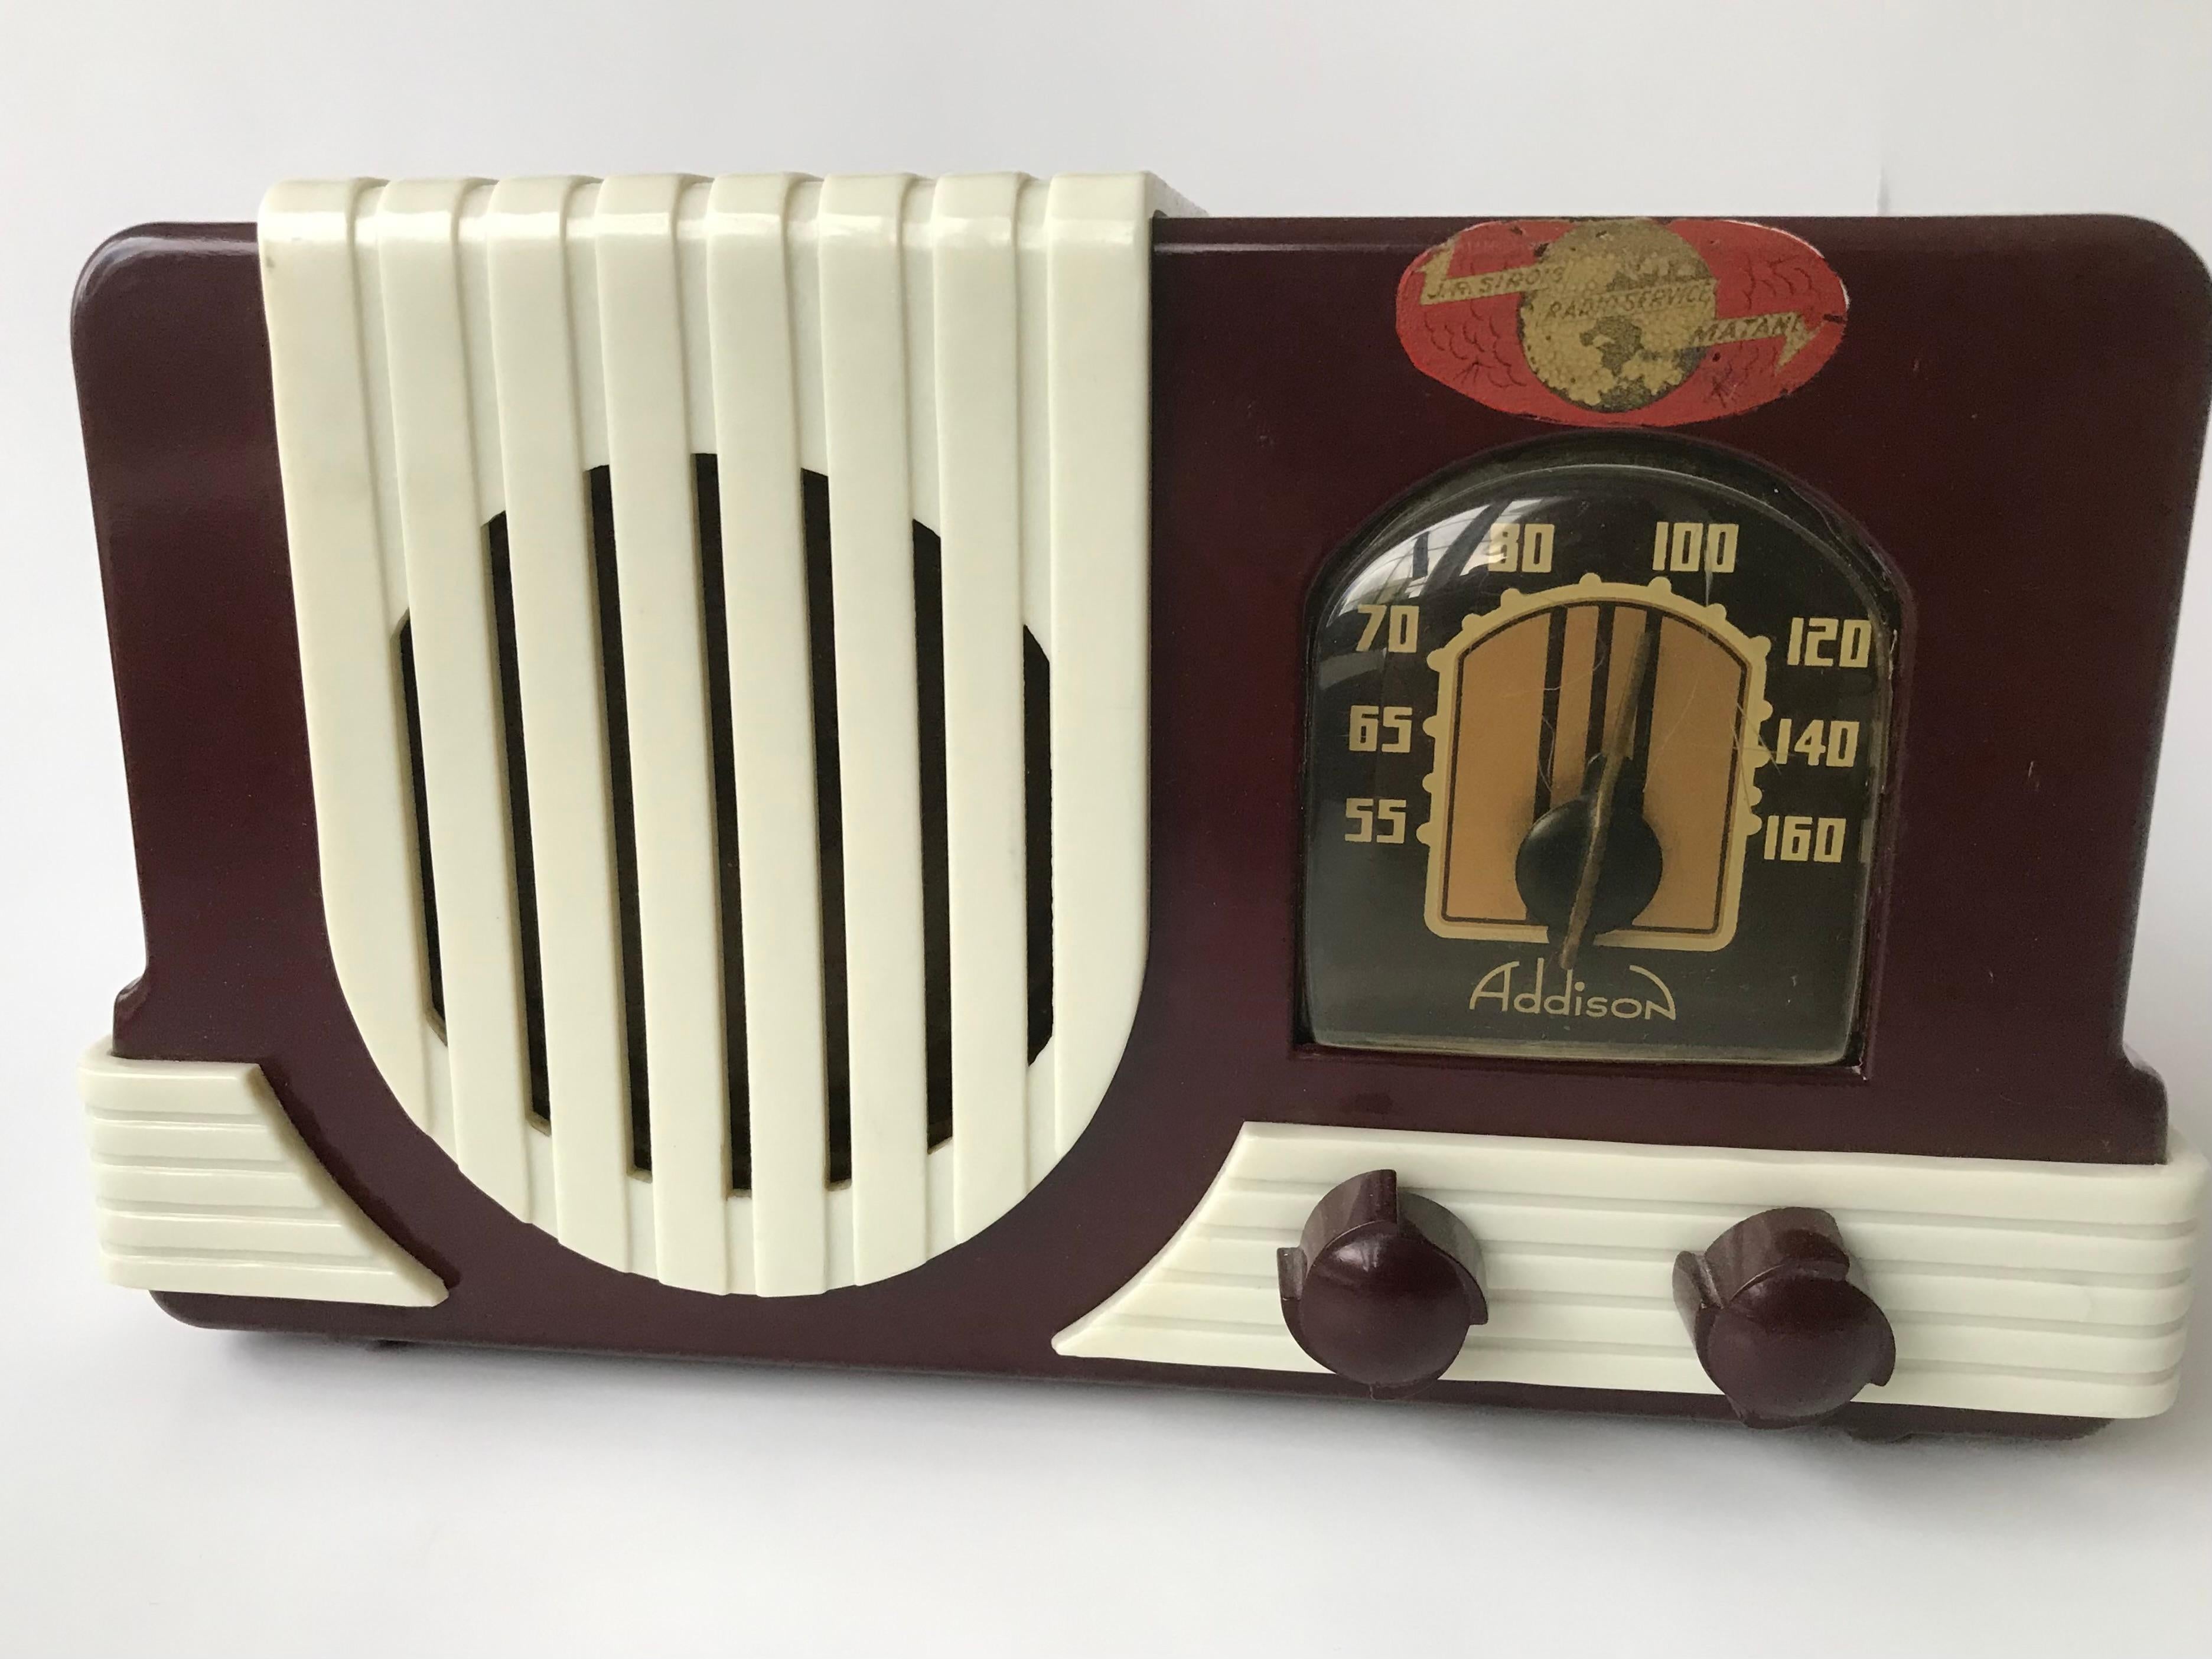 In 1939, Toronto-based Addison Industries Ltd., a Canadian company, was founded focussing on the production of commercial tube radios.  The Model 2 “Small Addison” series, featured here, has a large ridged grille or speaker cover that covers nearly